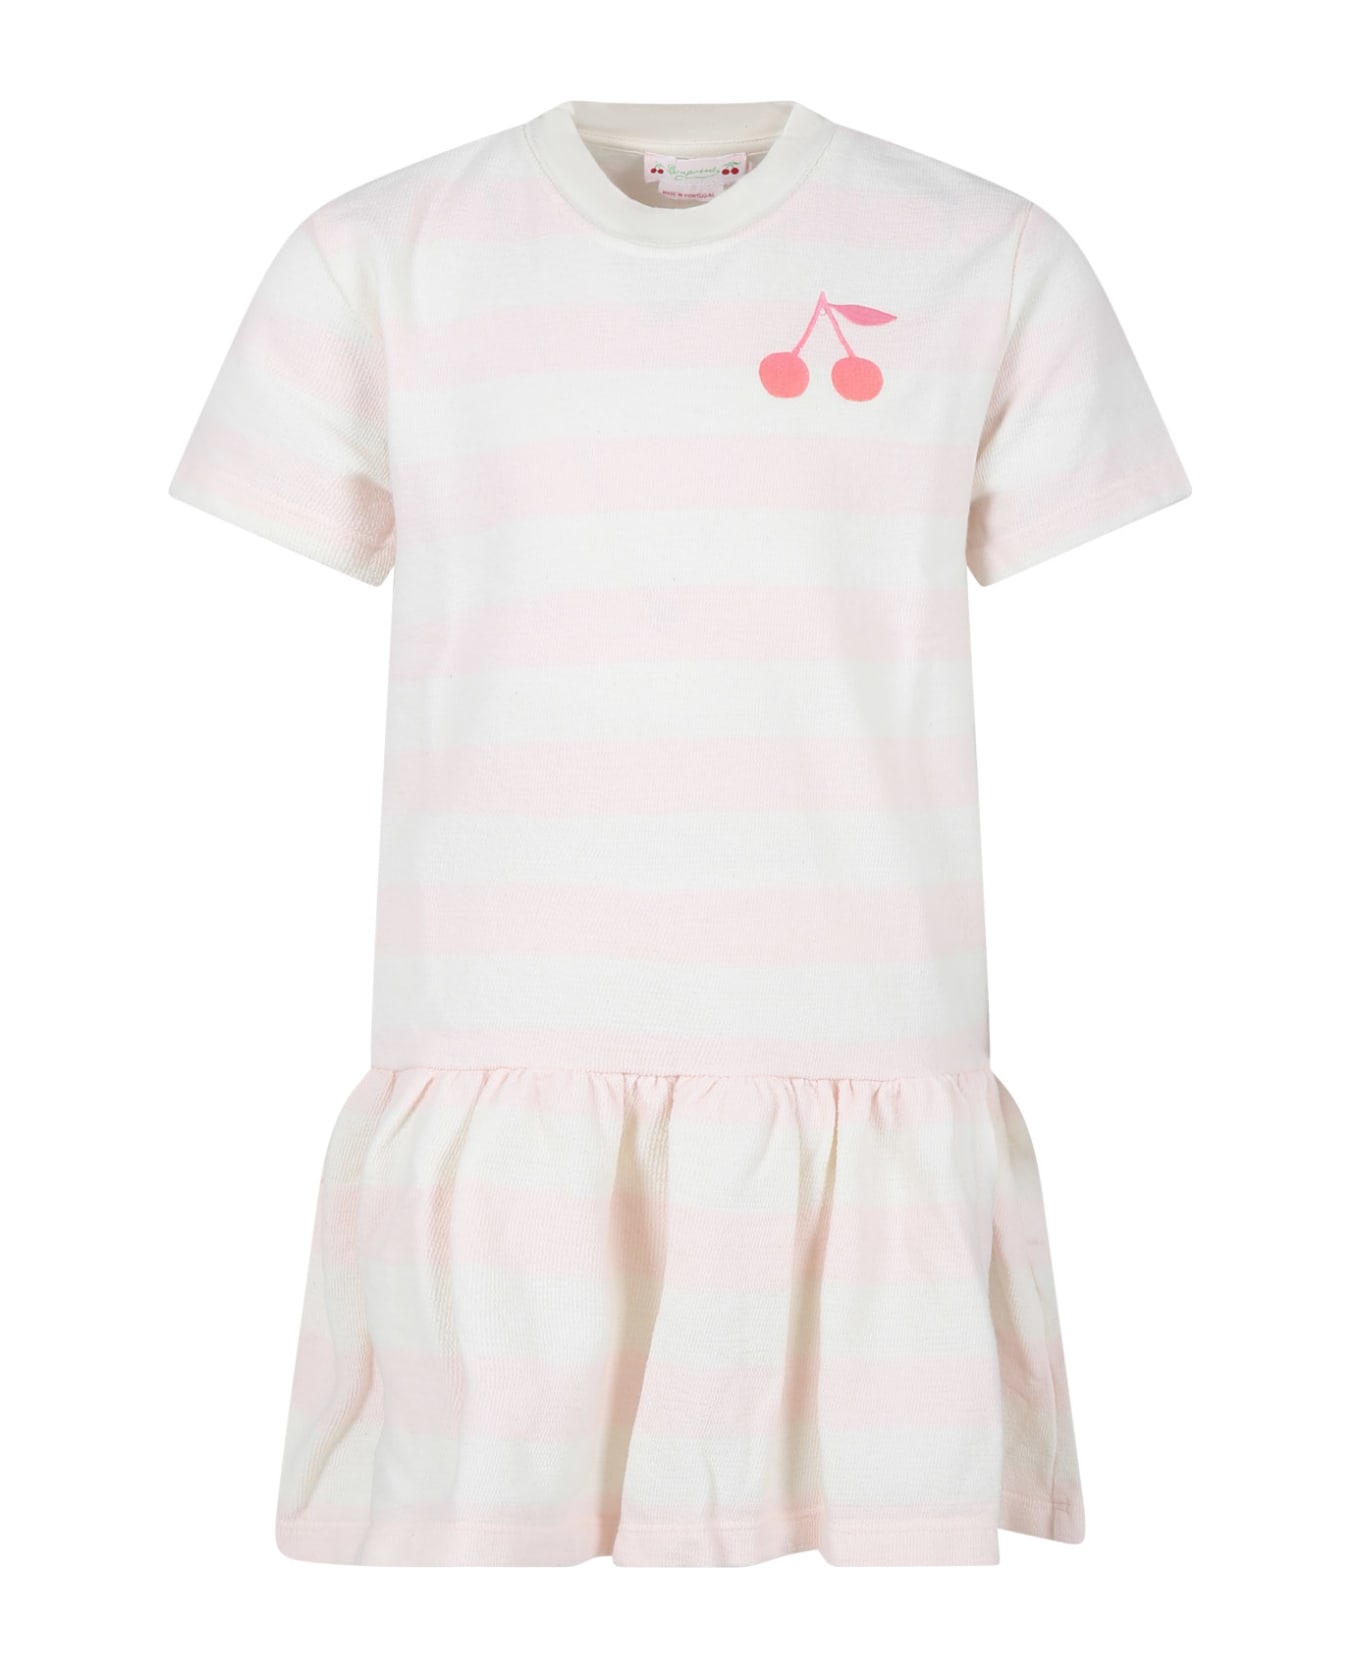 Bonpoint Ivory Dress For Girl With Iconic Cherries - White